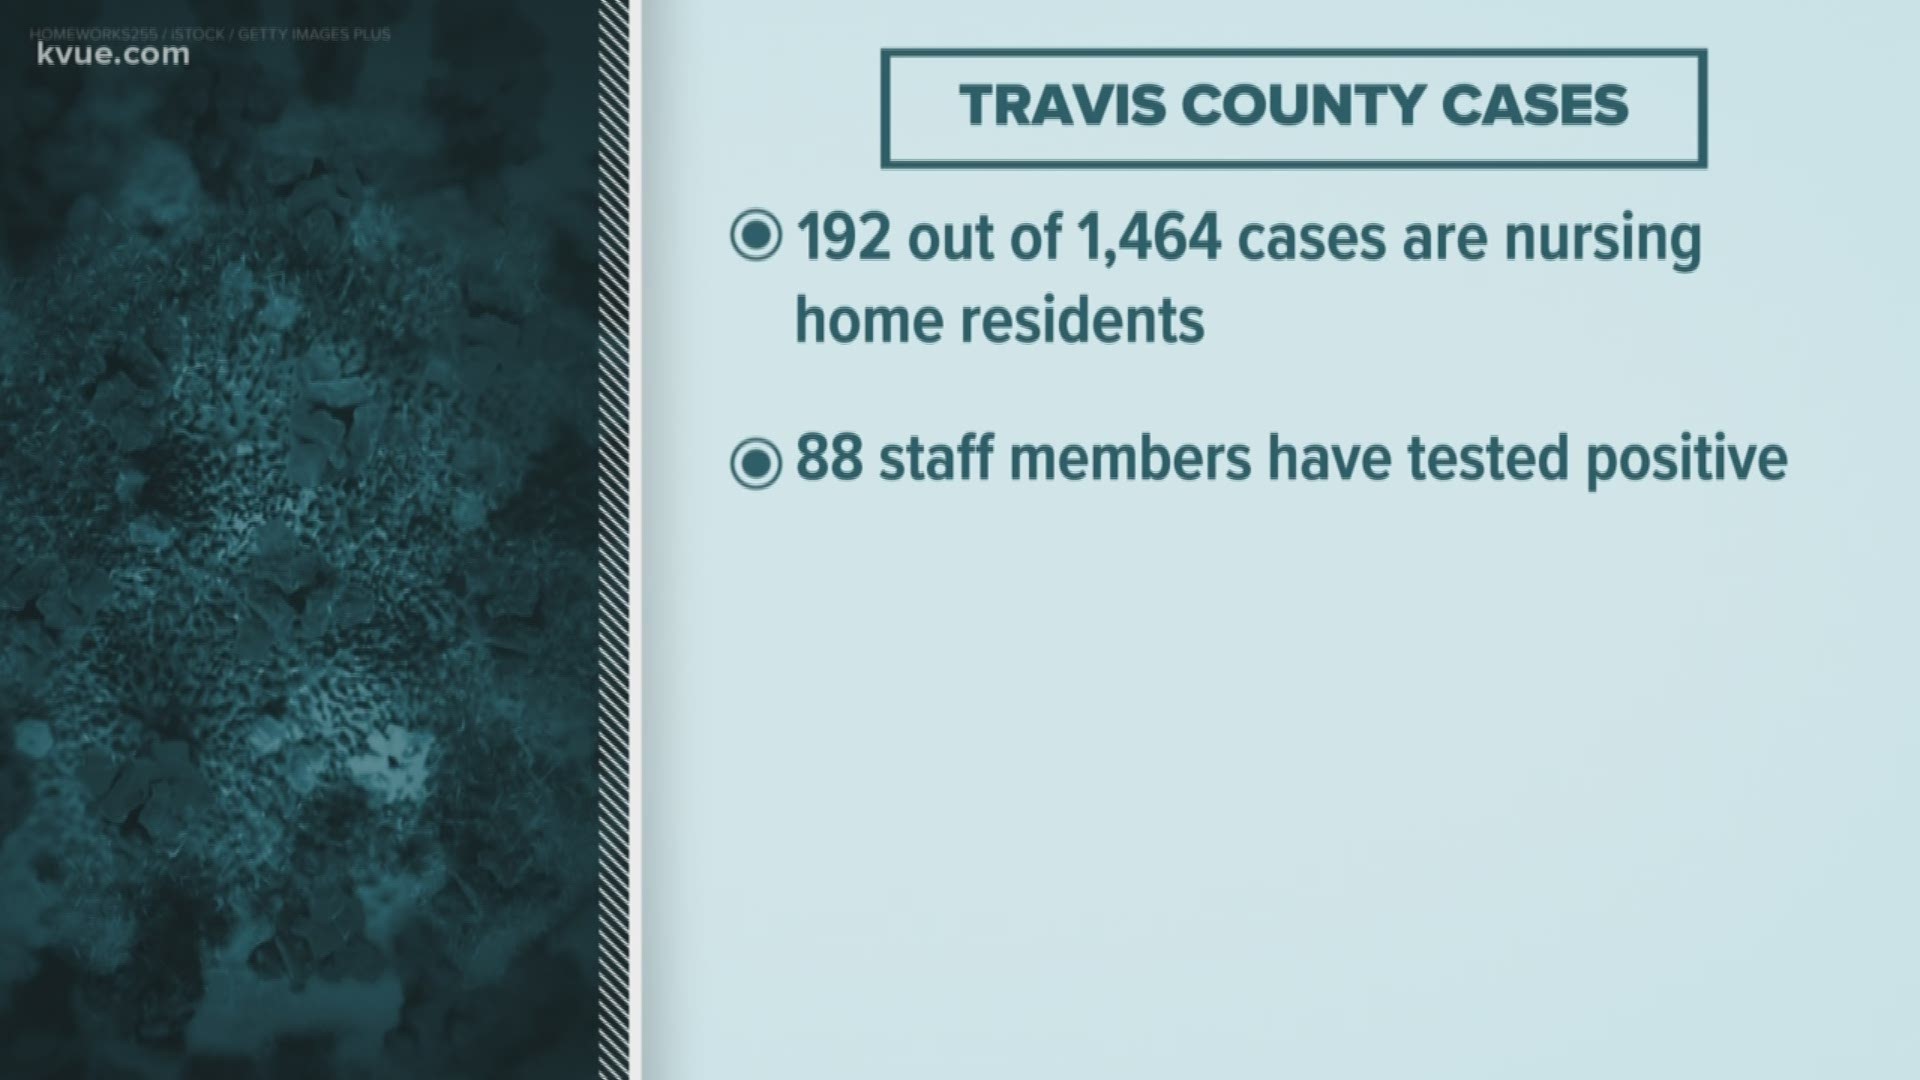 Twelve residents at one Austin nursing home have died from COVID-19.